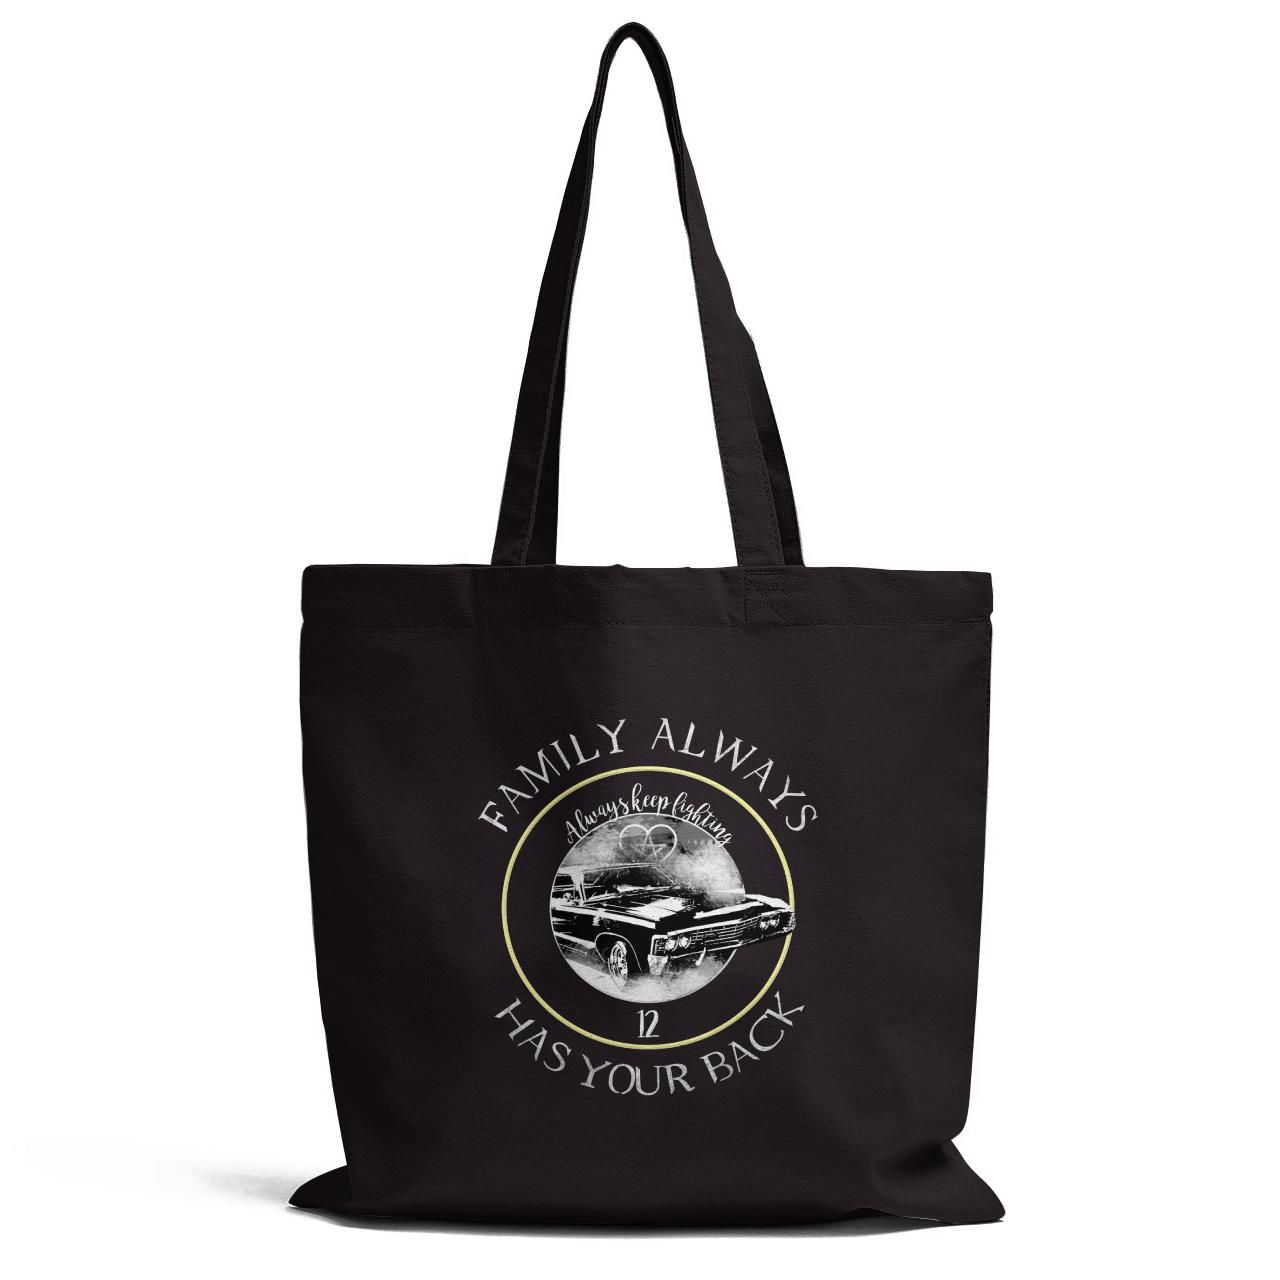 Family Always Has Your Back Tote Bag